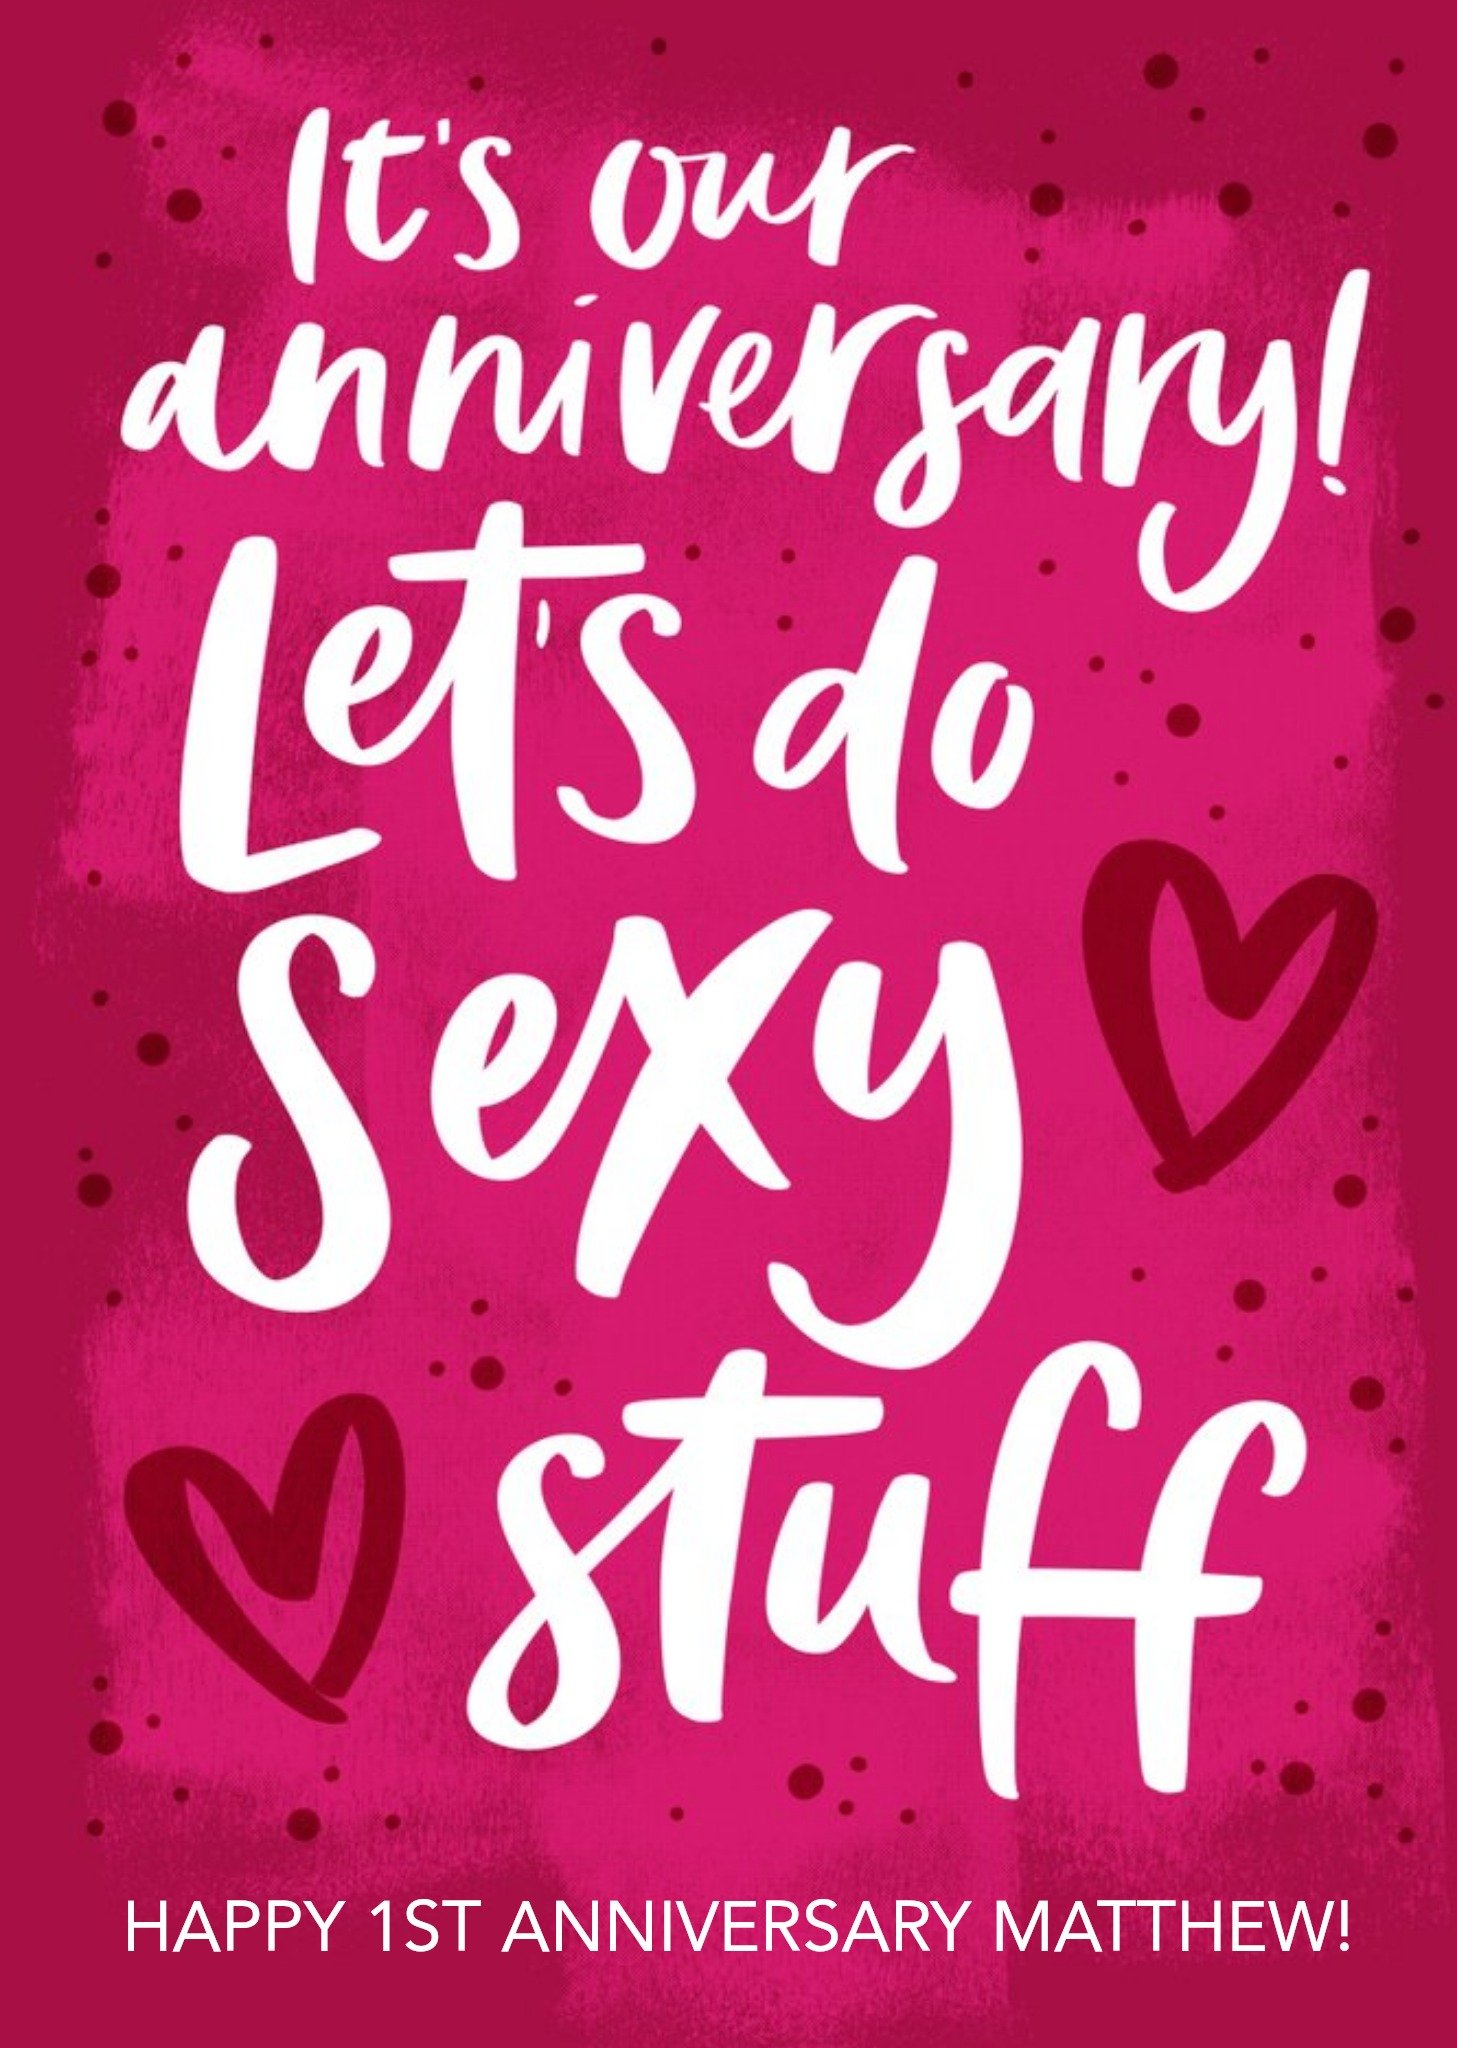 Moonpig Anniversary Card - It's Our Anniversary Let's Do Sexy Stuff Calligraphy Typography Lettering